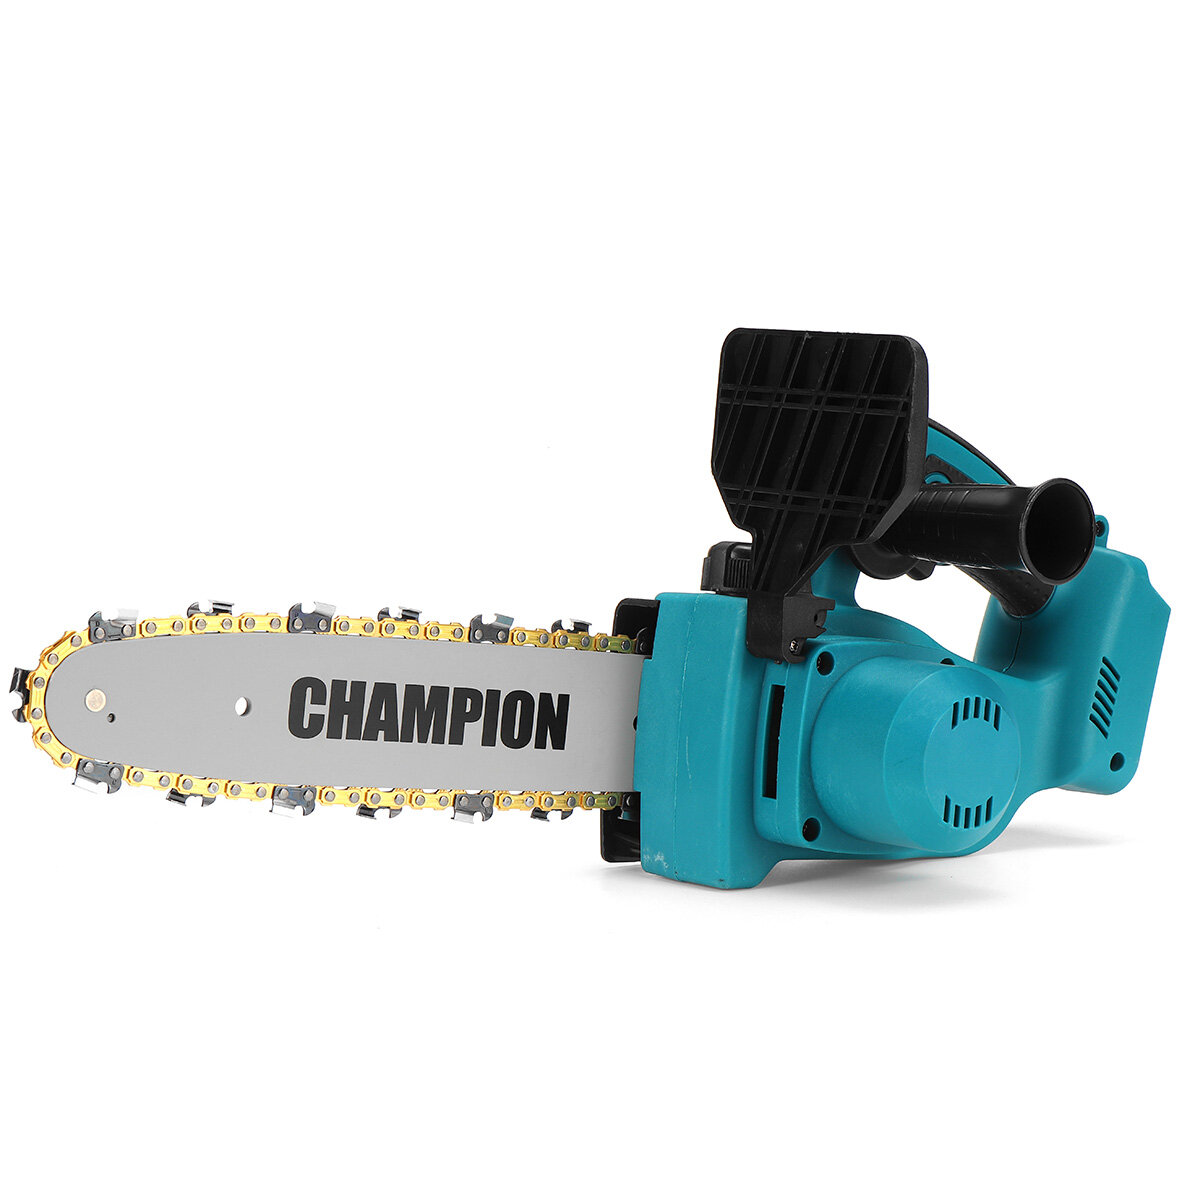 Drillpro 10Inch Cordless Brushless Electric Chain Saw Woodworking Wood Cutter For Makita Battery W/ Plastic Box